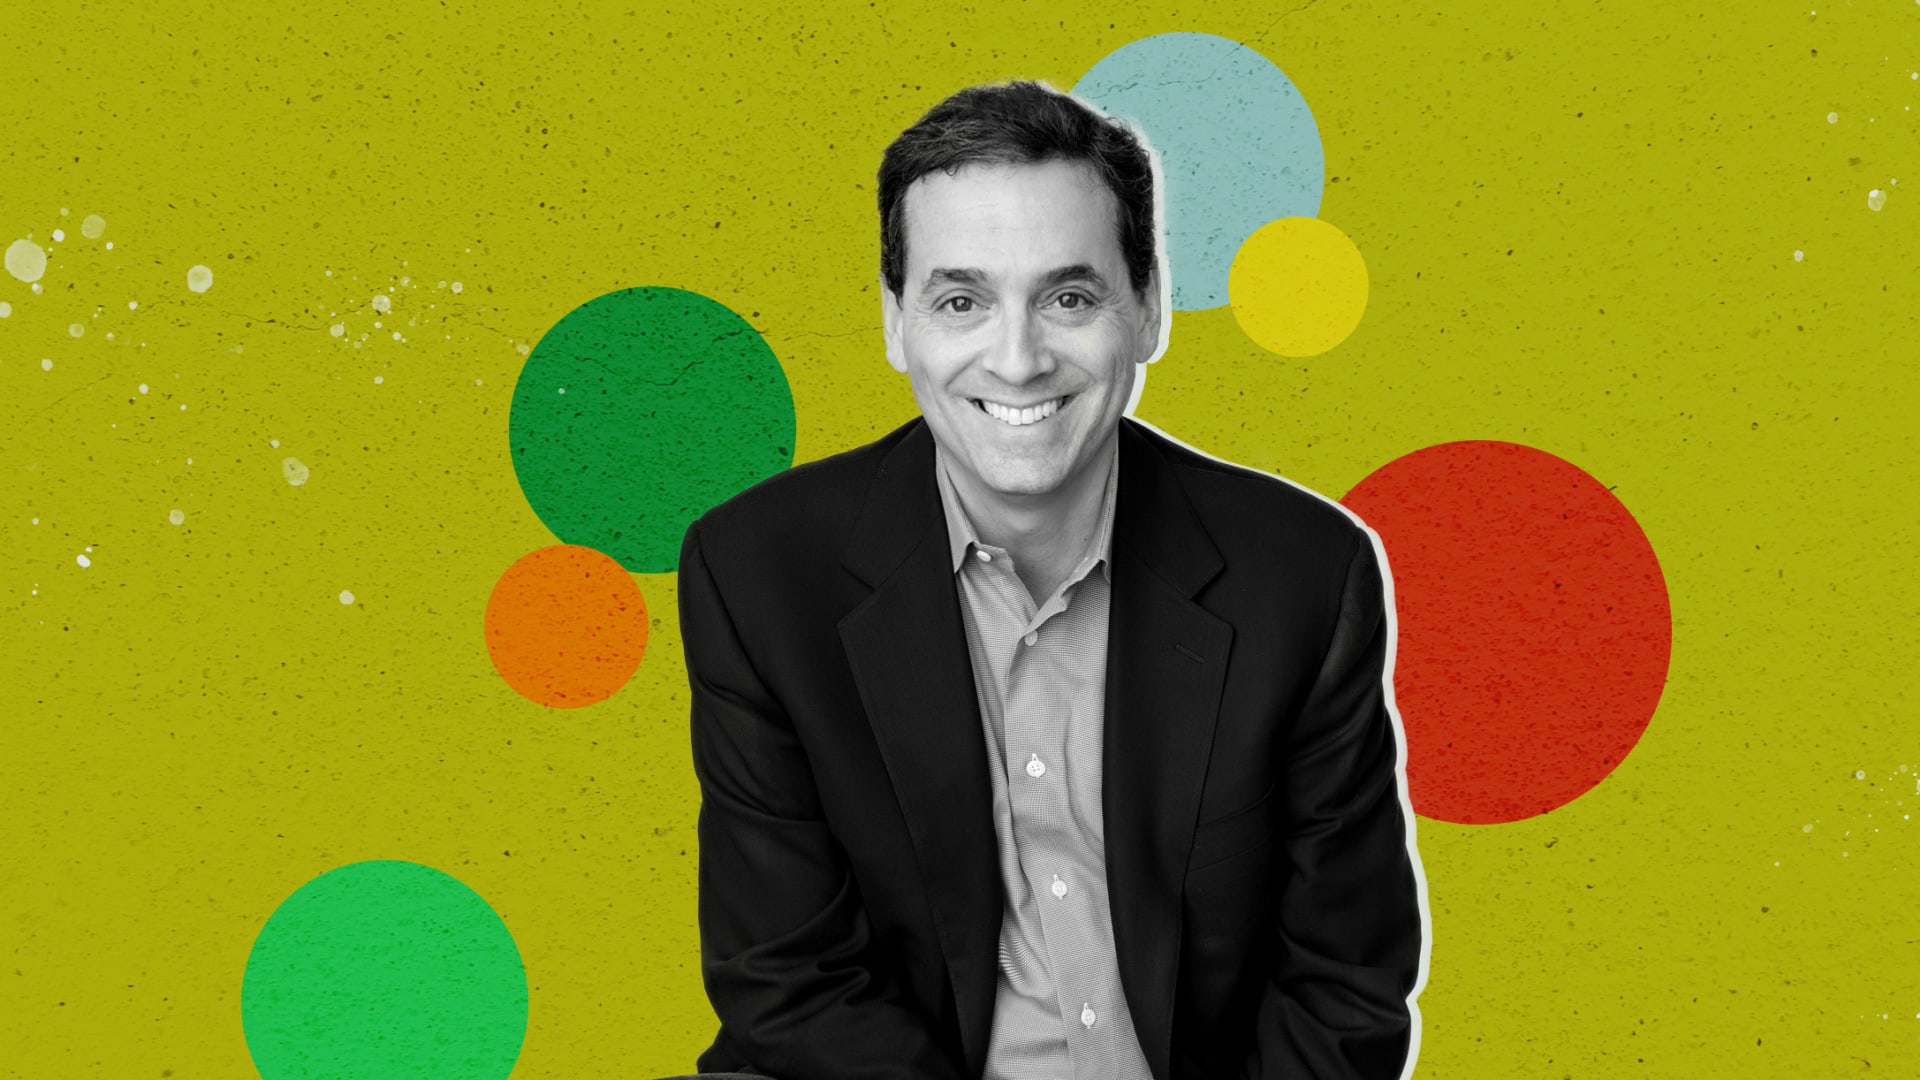 Daniel Pink: Great Leaders Share Their Failures With Their Teams